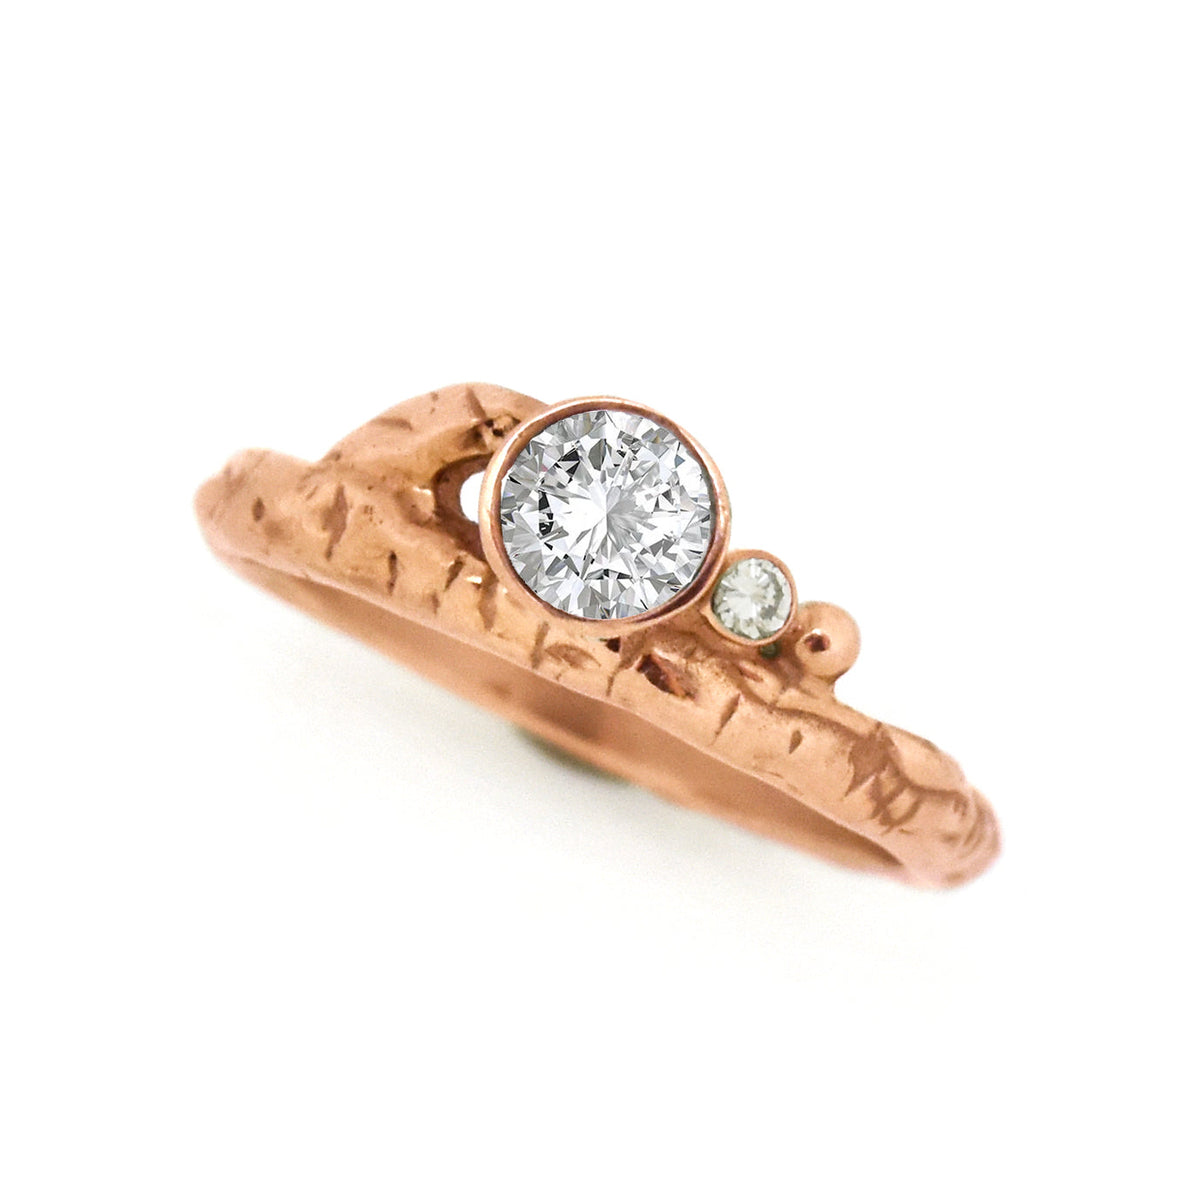 Gold Diamond Birch Twig Ring - your choice of 5mm stone & gold - Wedding Ring Recycled Diamond / 14K Rose Gold Recycled Diamond / 14K Yellow Gold 6279 - handmade by Beth Millner Jewelry